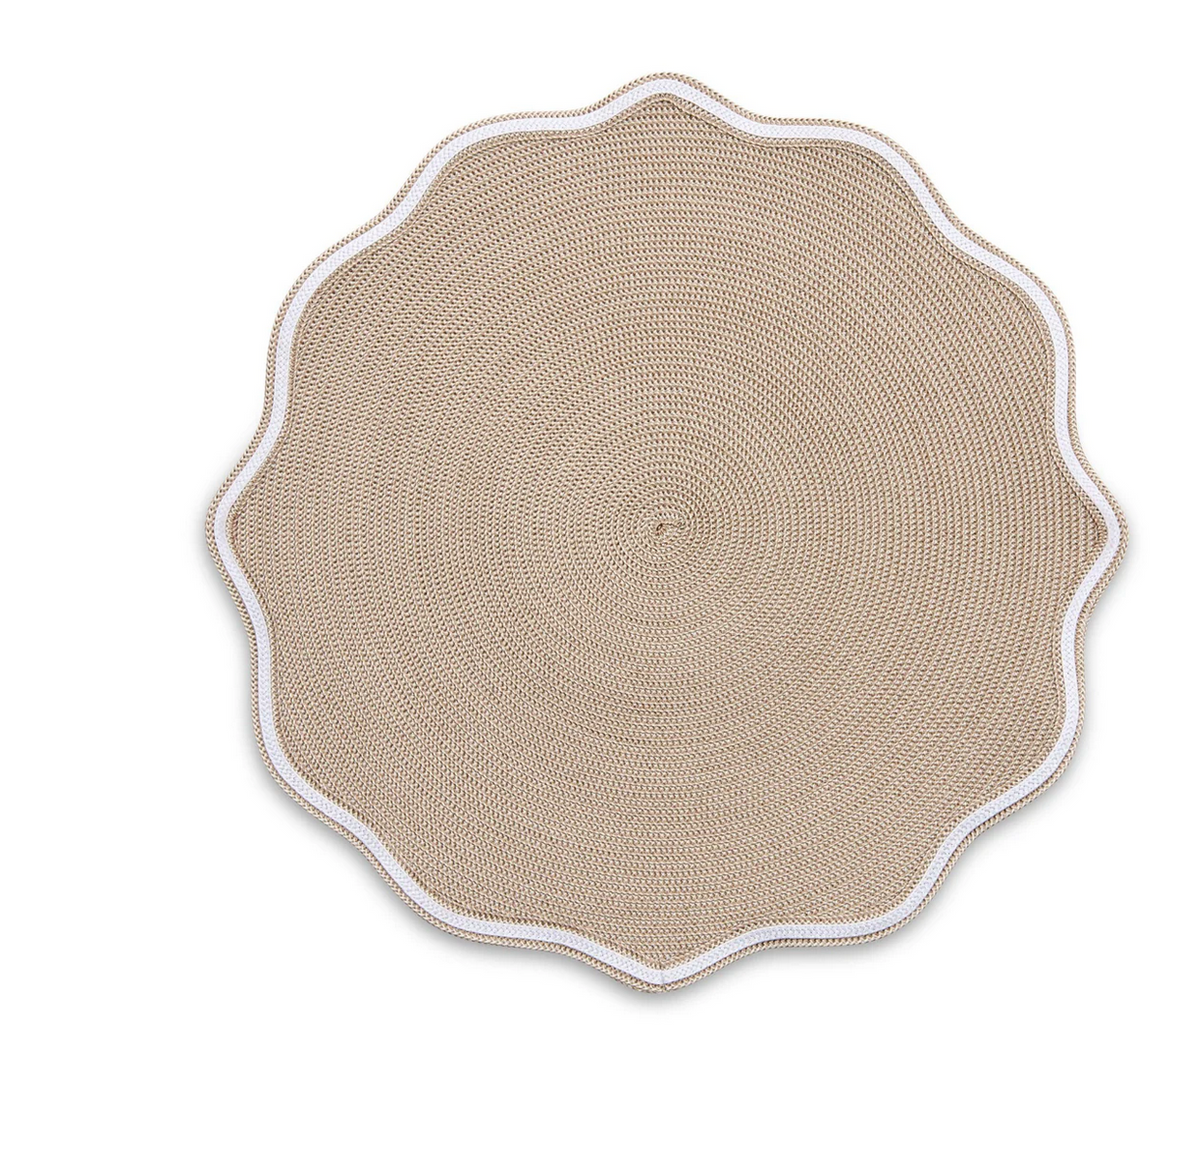 Piped Oxford Placemat s/4 - Ivory Dust